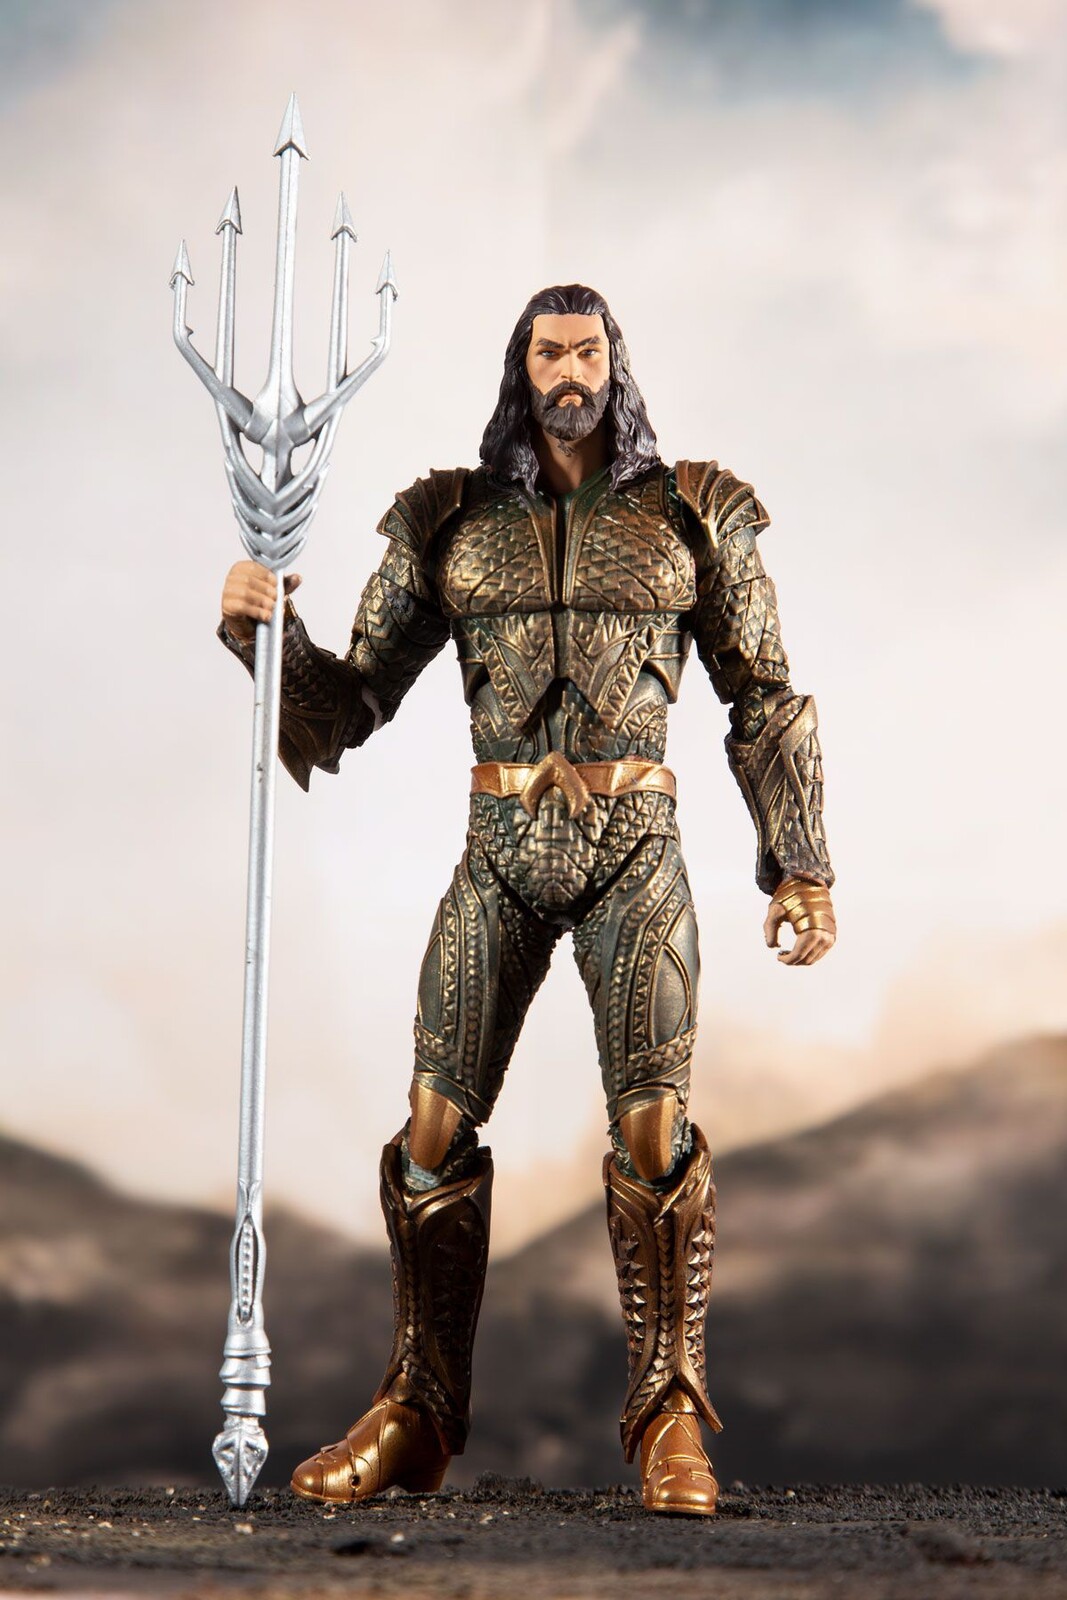 Justice League - Aqua Man - Engineering and joint articulation.